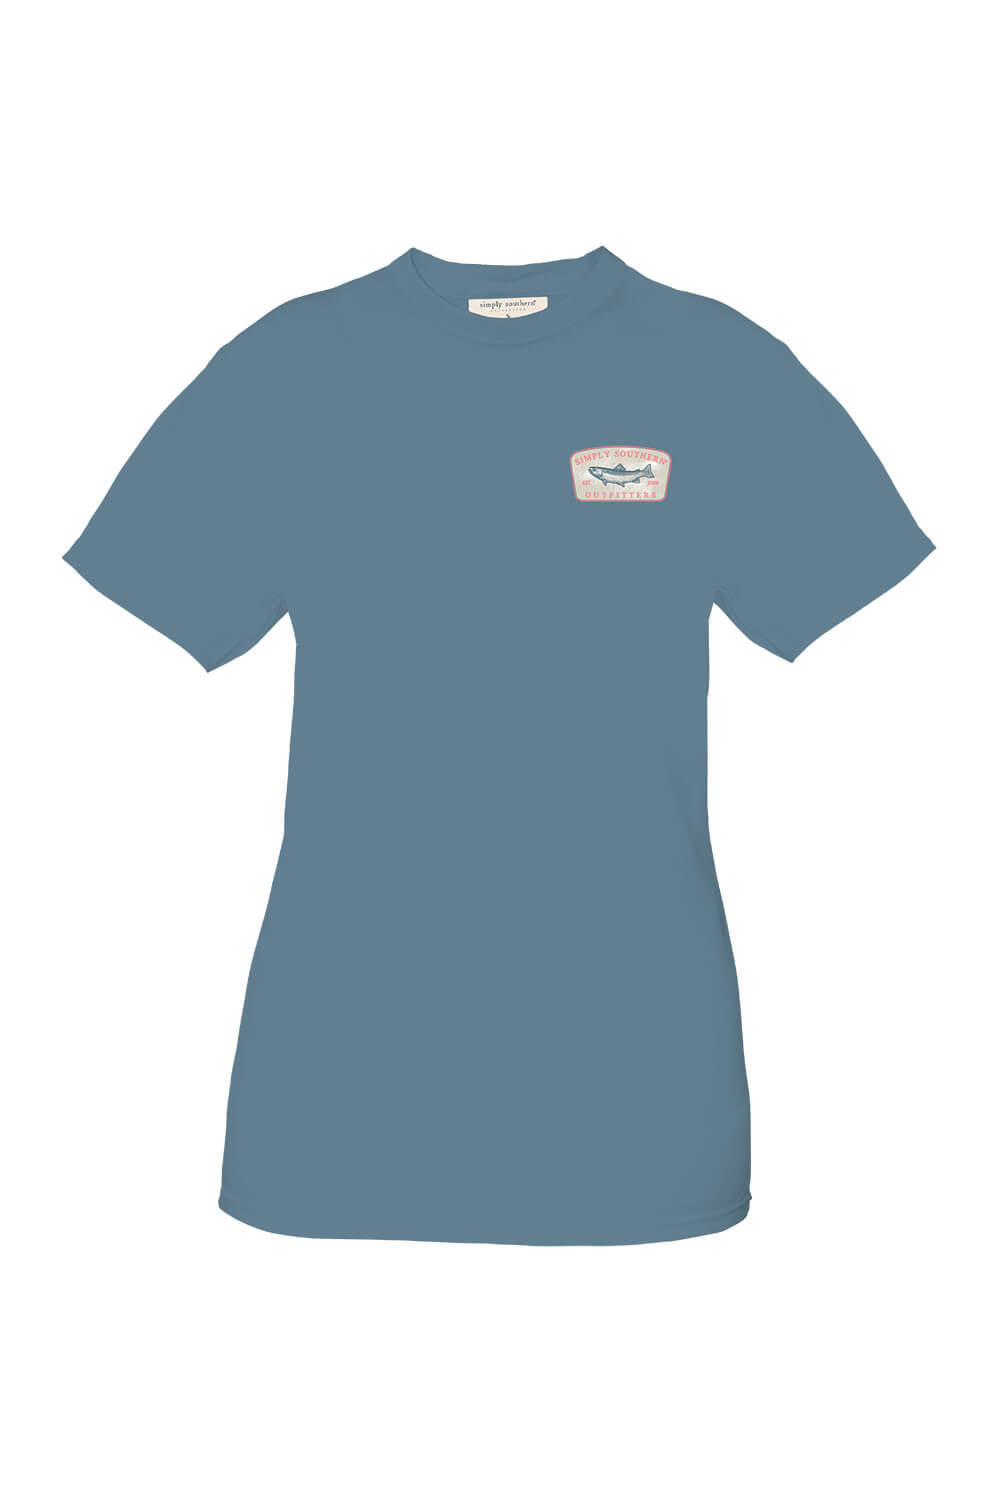 Simply Southern Fish Logo T-Shirt for Men in Blue